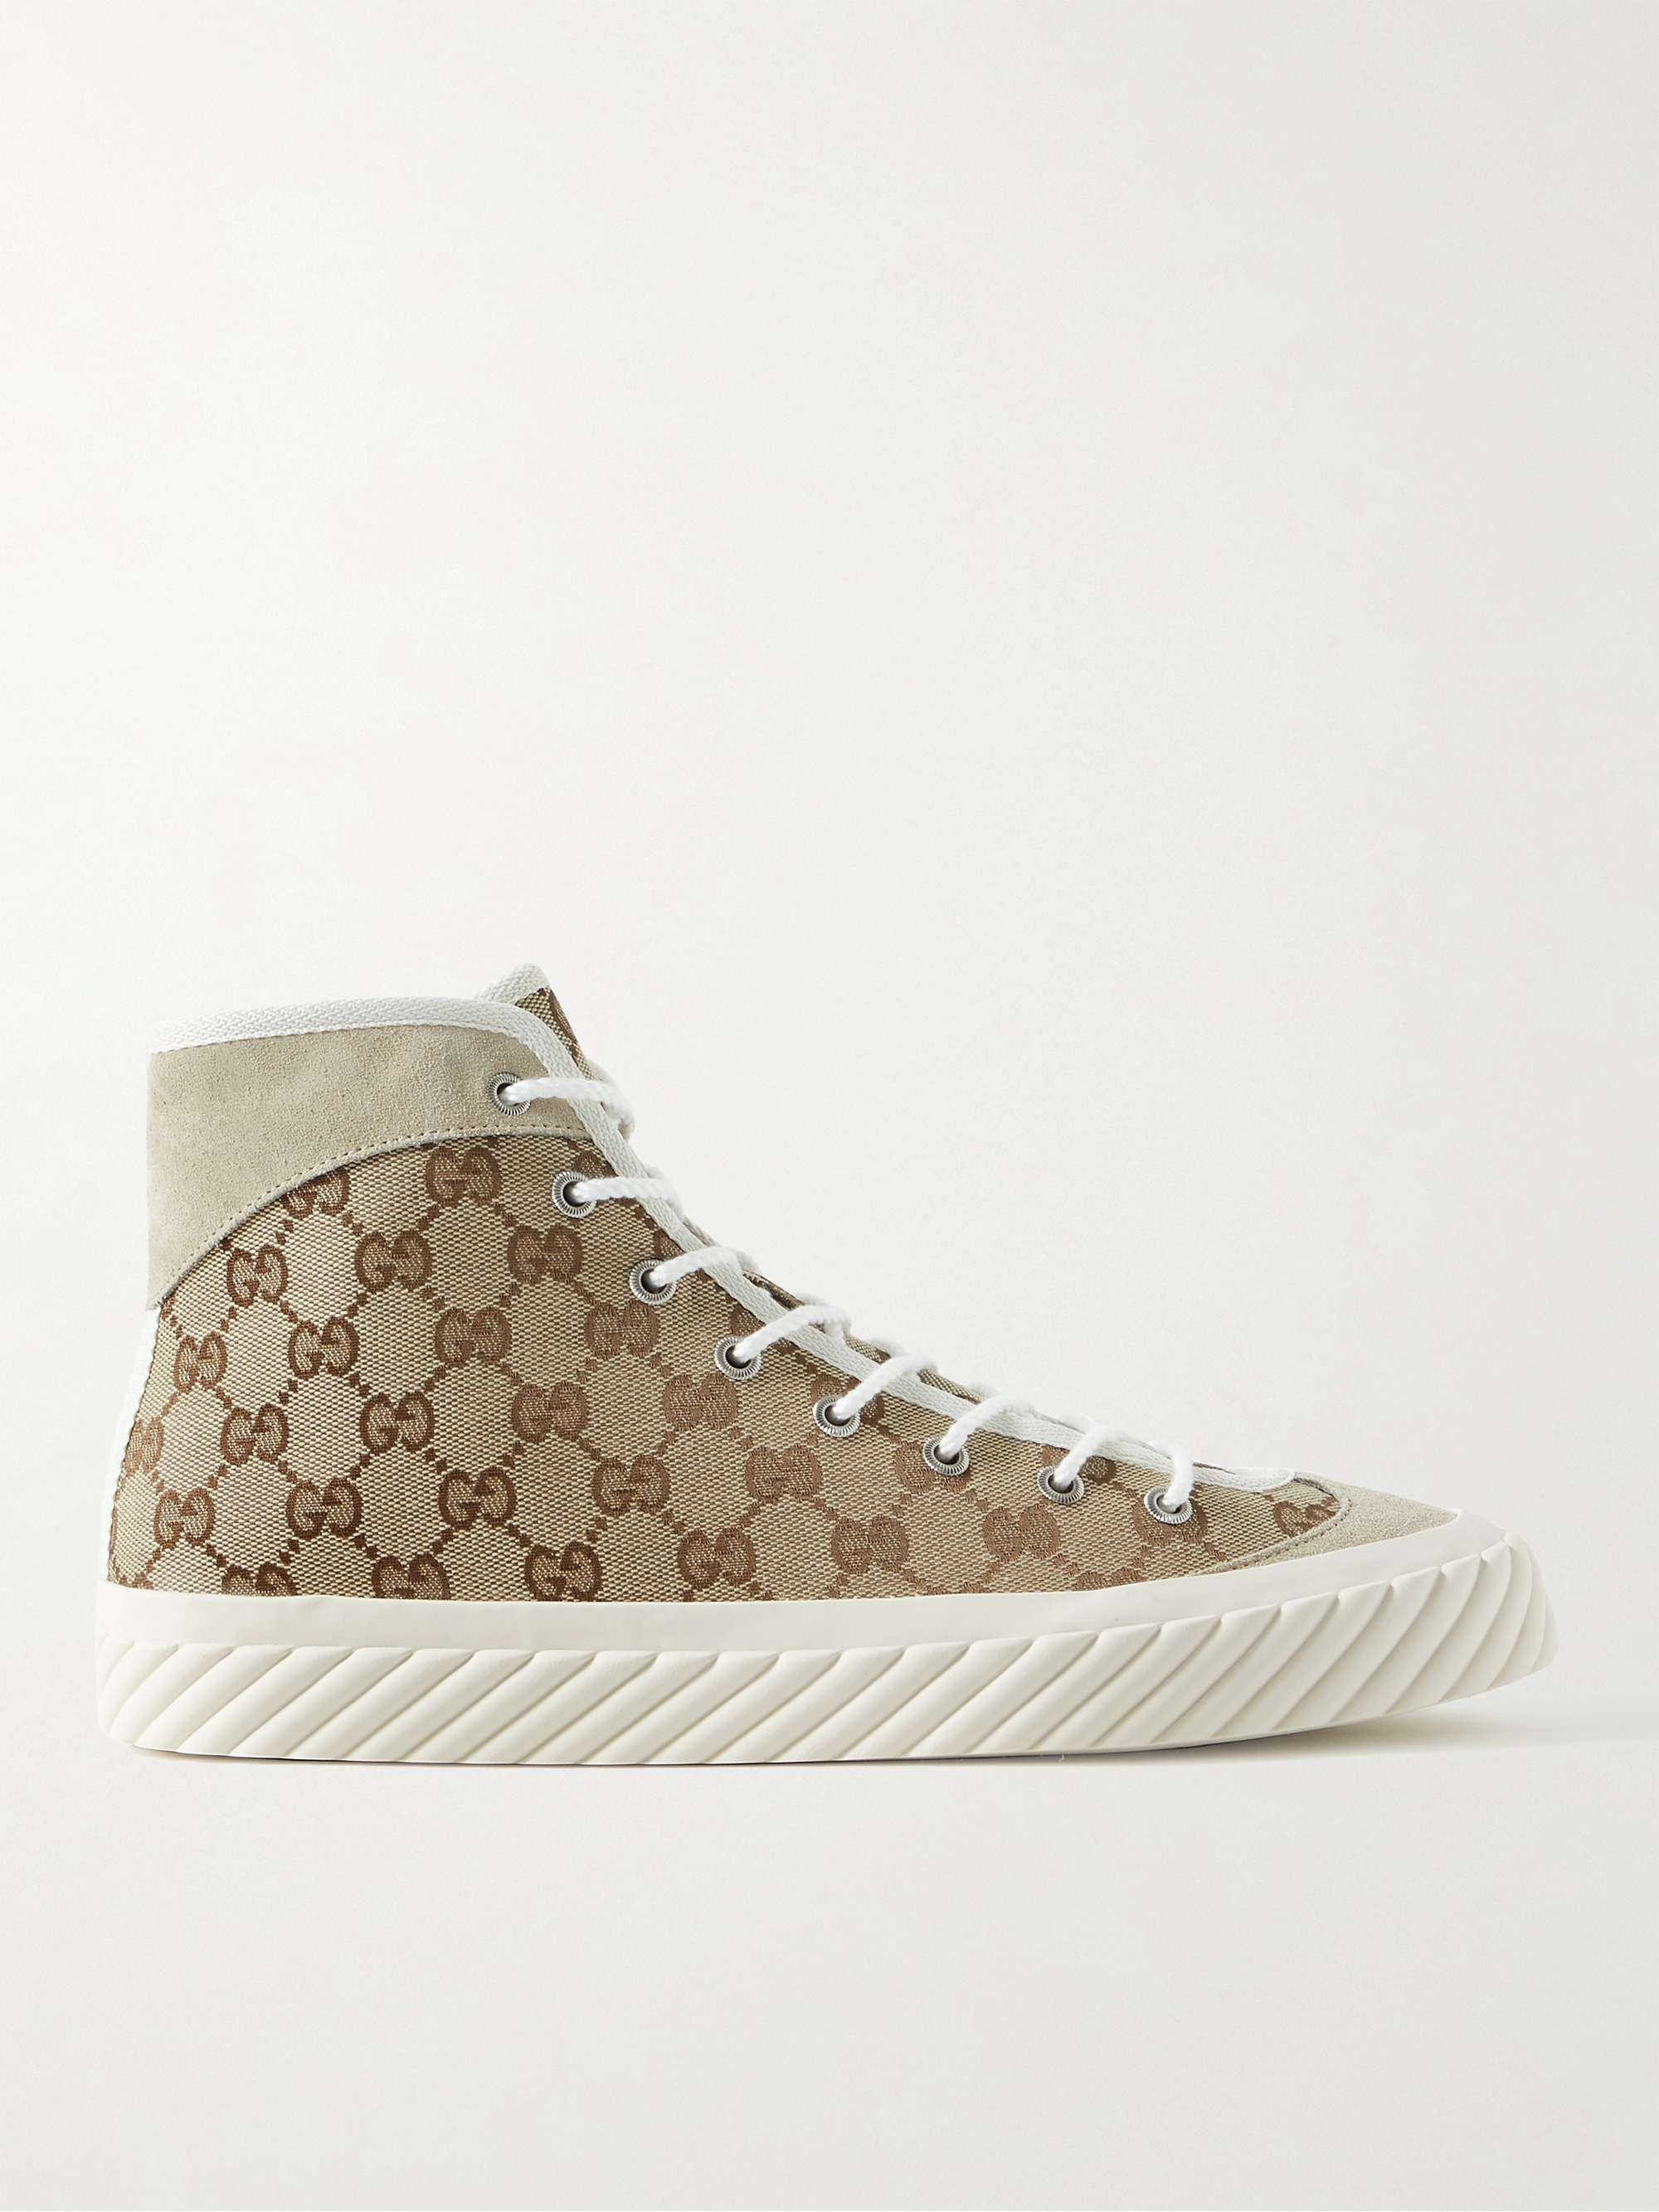 GUCCI Suede-Trimmed Monogrammed Canvas High-Top Sneakers | MR PORTER